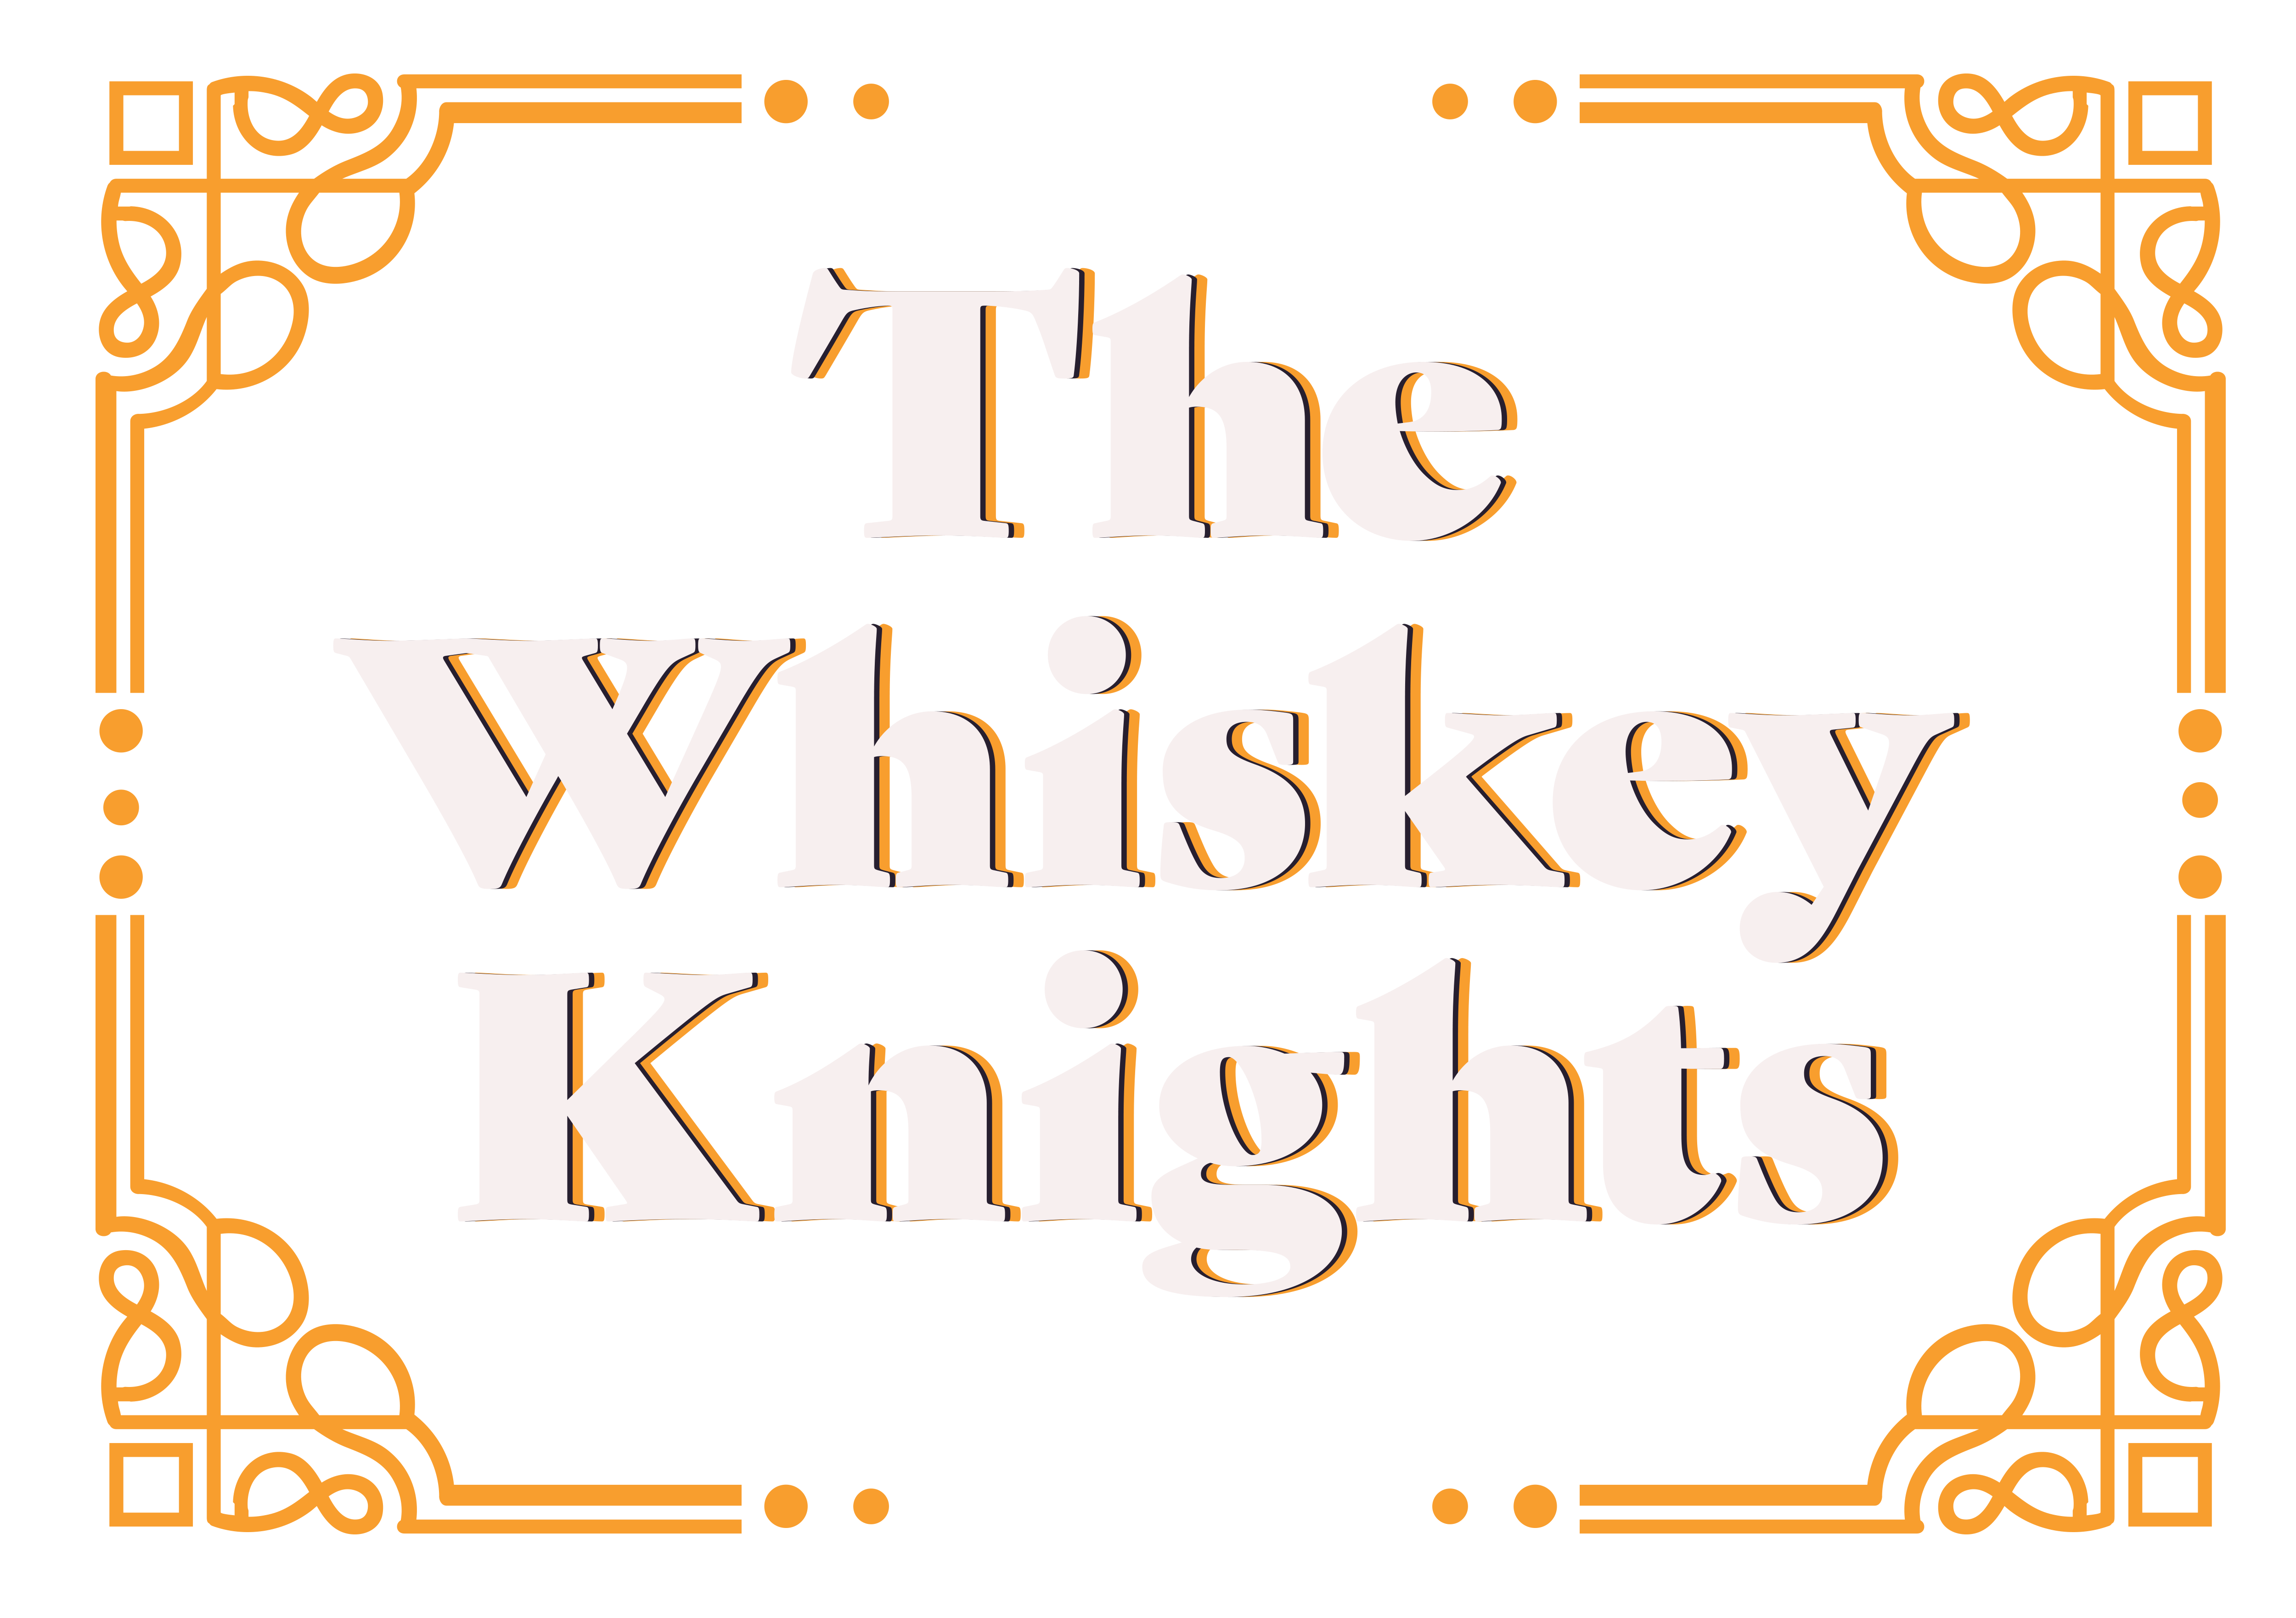 The Whiskey Knights